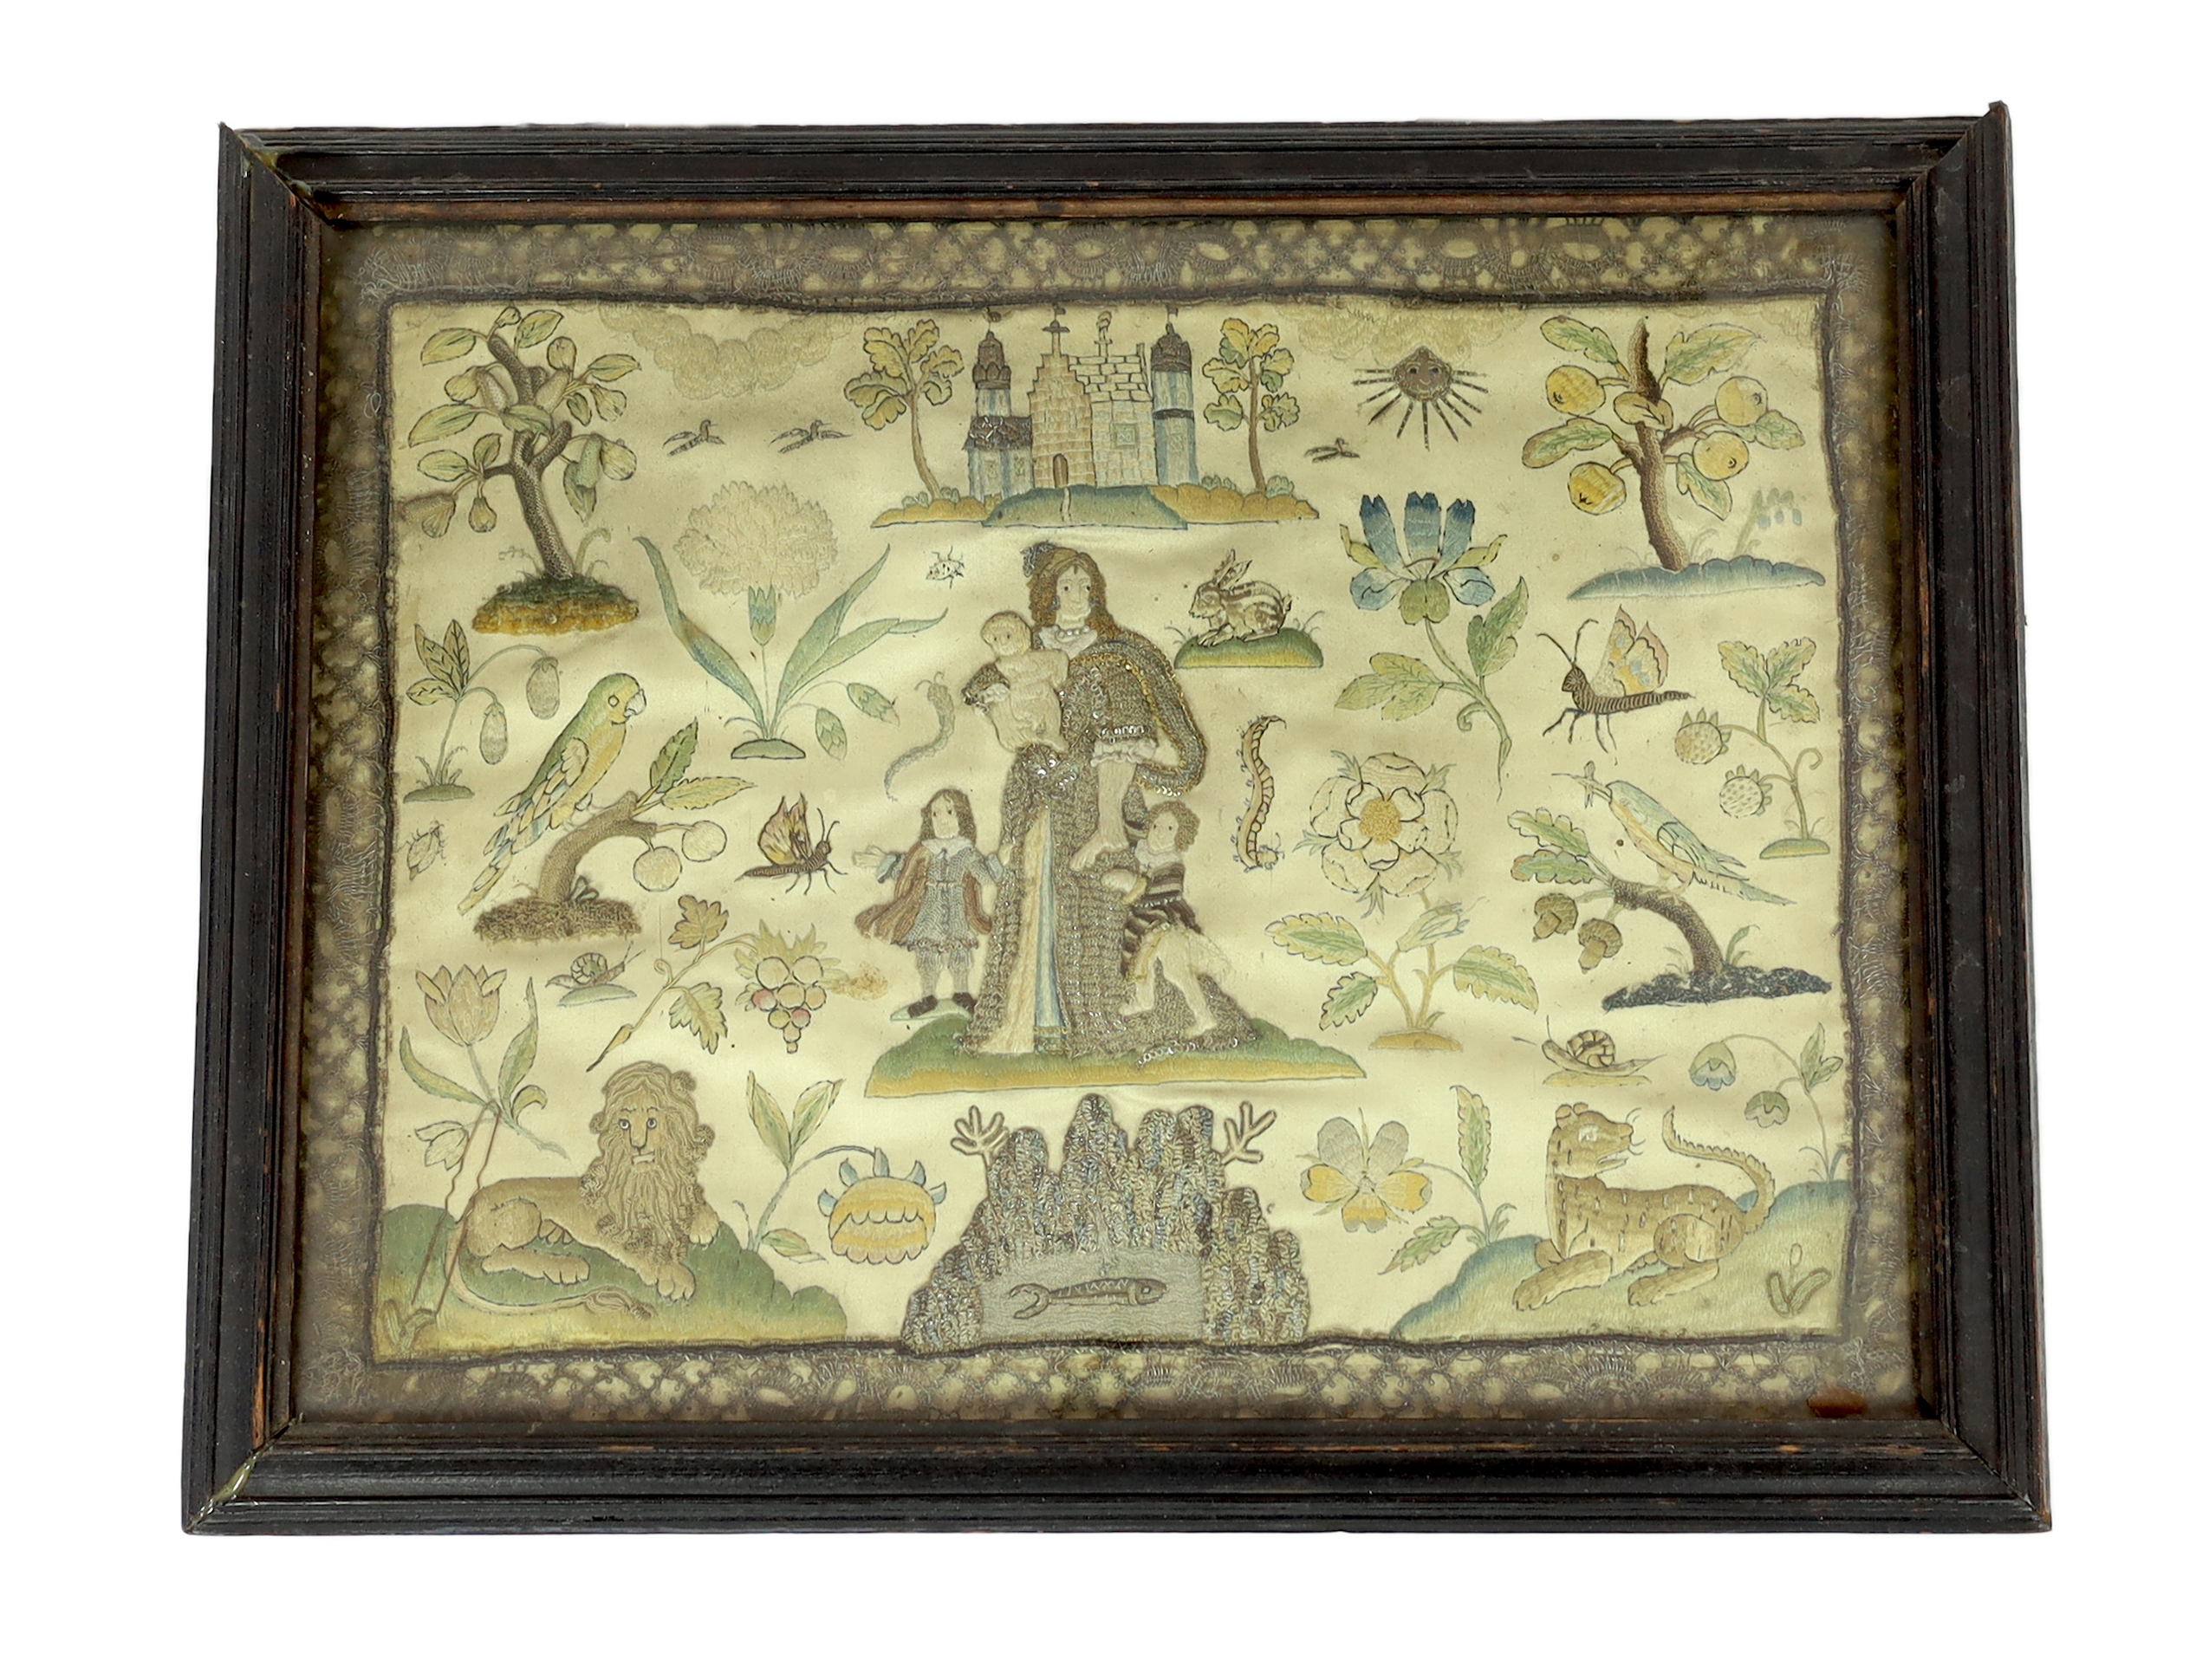 A 17th century stumpwork panel depicting a mother and children in a garden